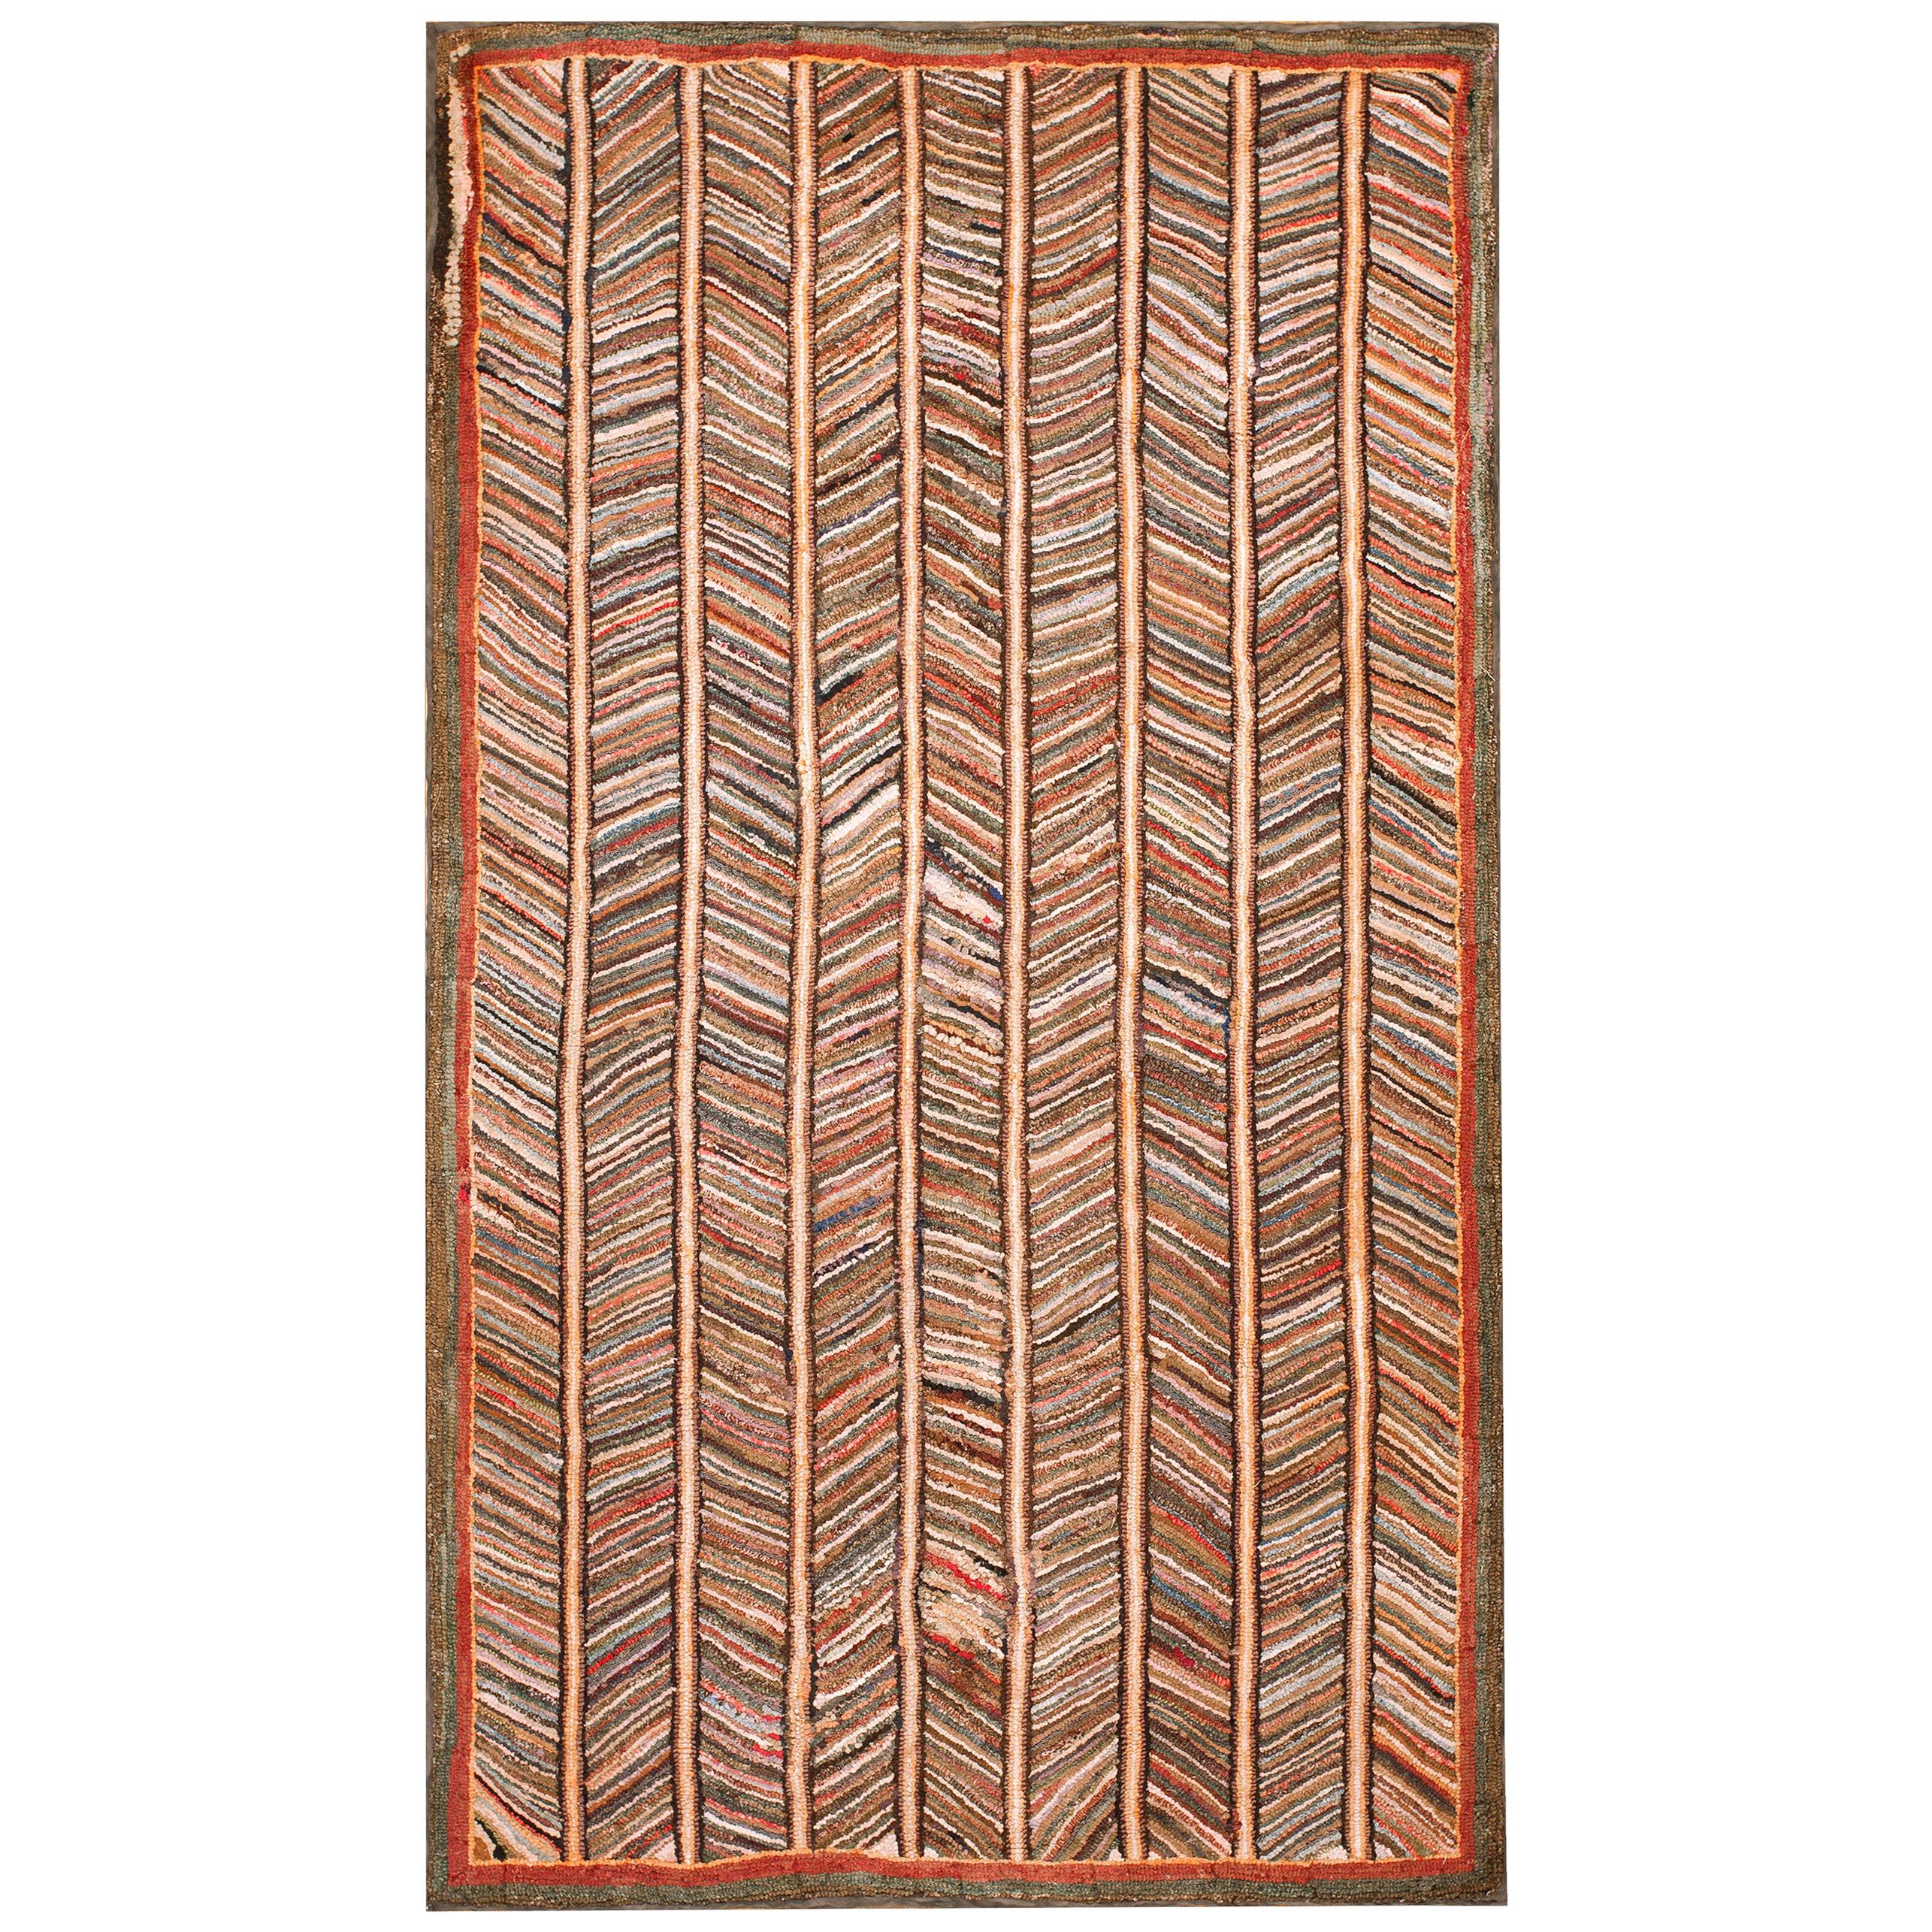 Late 19th Century American Hooked Rug ( 4'4"x 7'4" - 132 x 234 )